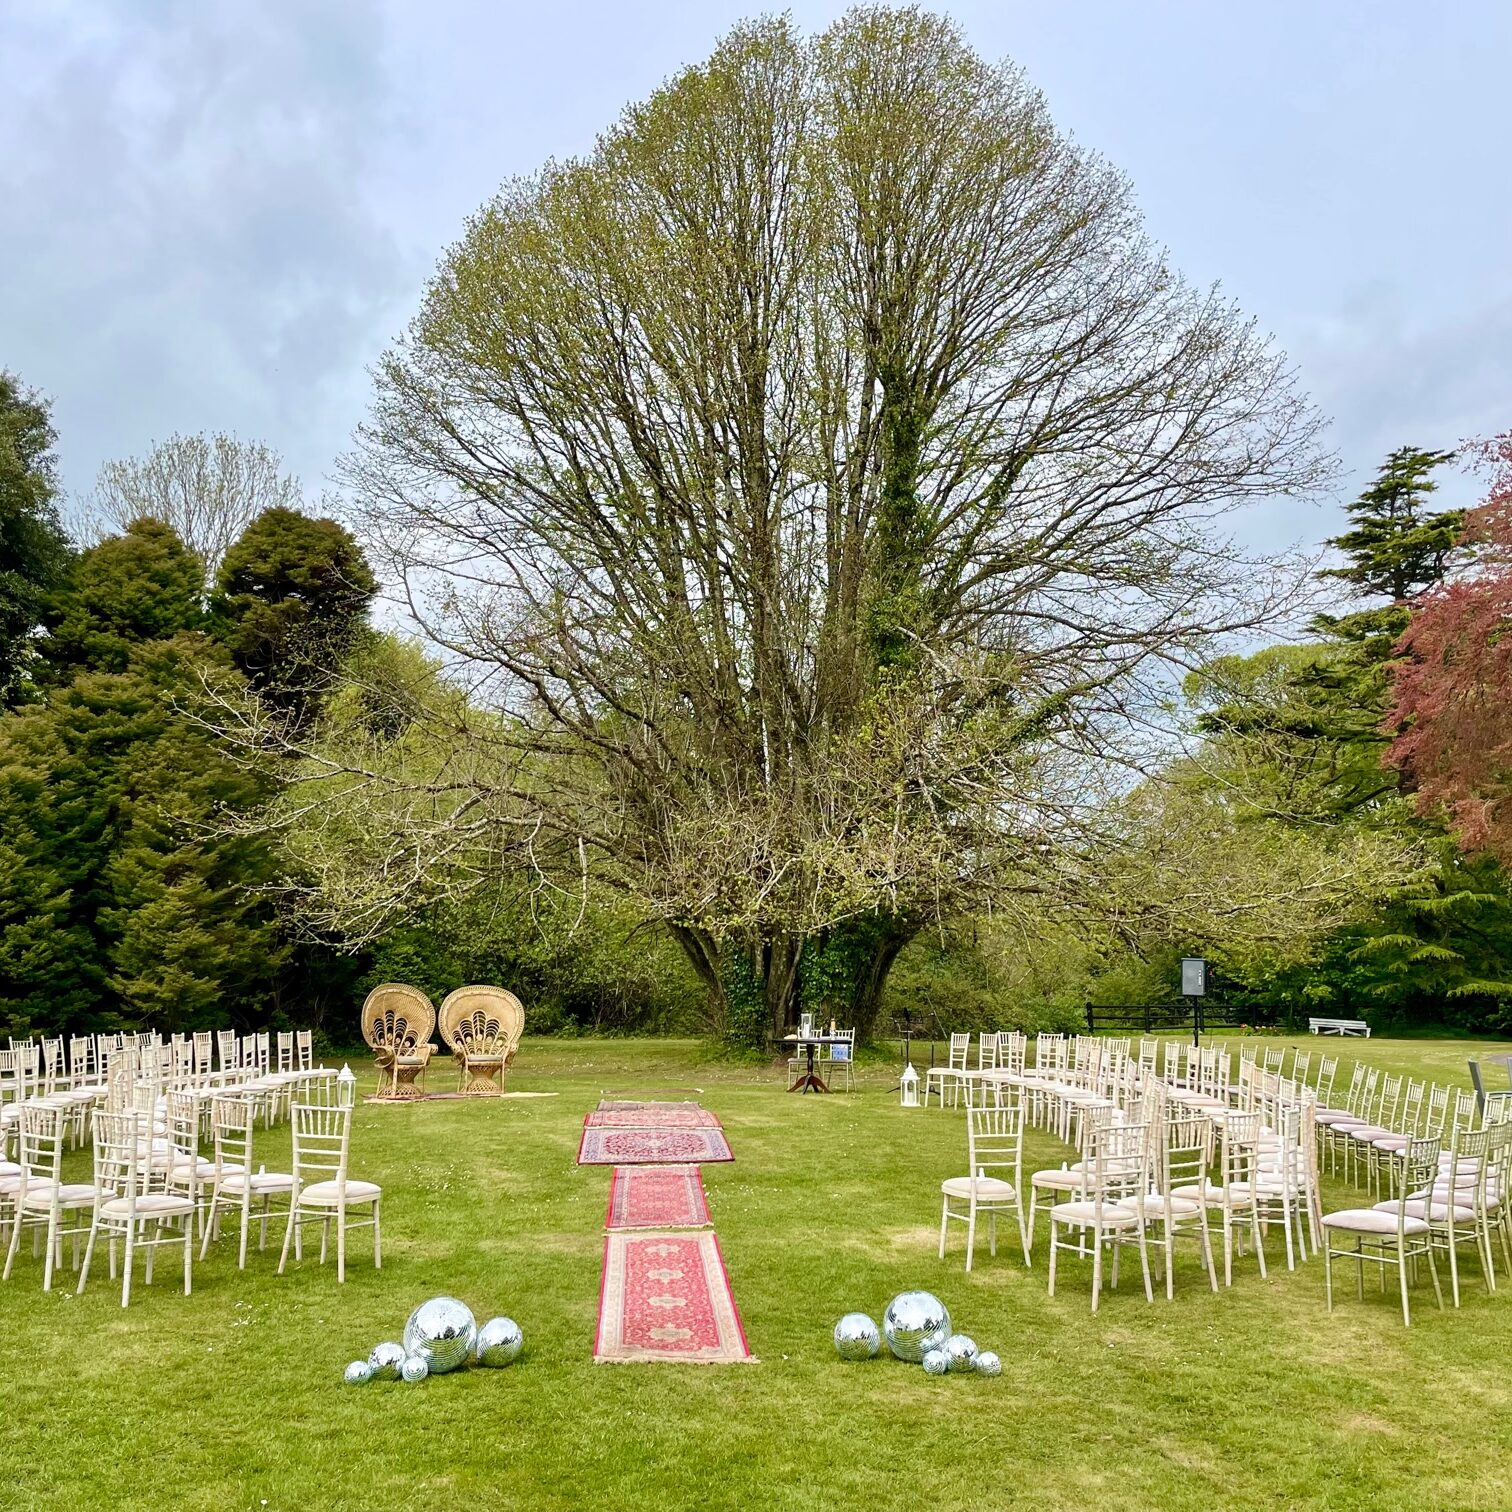 Outdoor wedding at Springfort Hall, Mallow, Co Cork -Caroline McCarthy - Your Celebrant Ireland - Registered Solemniser & Celebrant in Ireland conducting wedding and elopment ceremonies. Useful information and advise, articles and blogs on getting married in Ireland